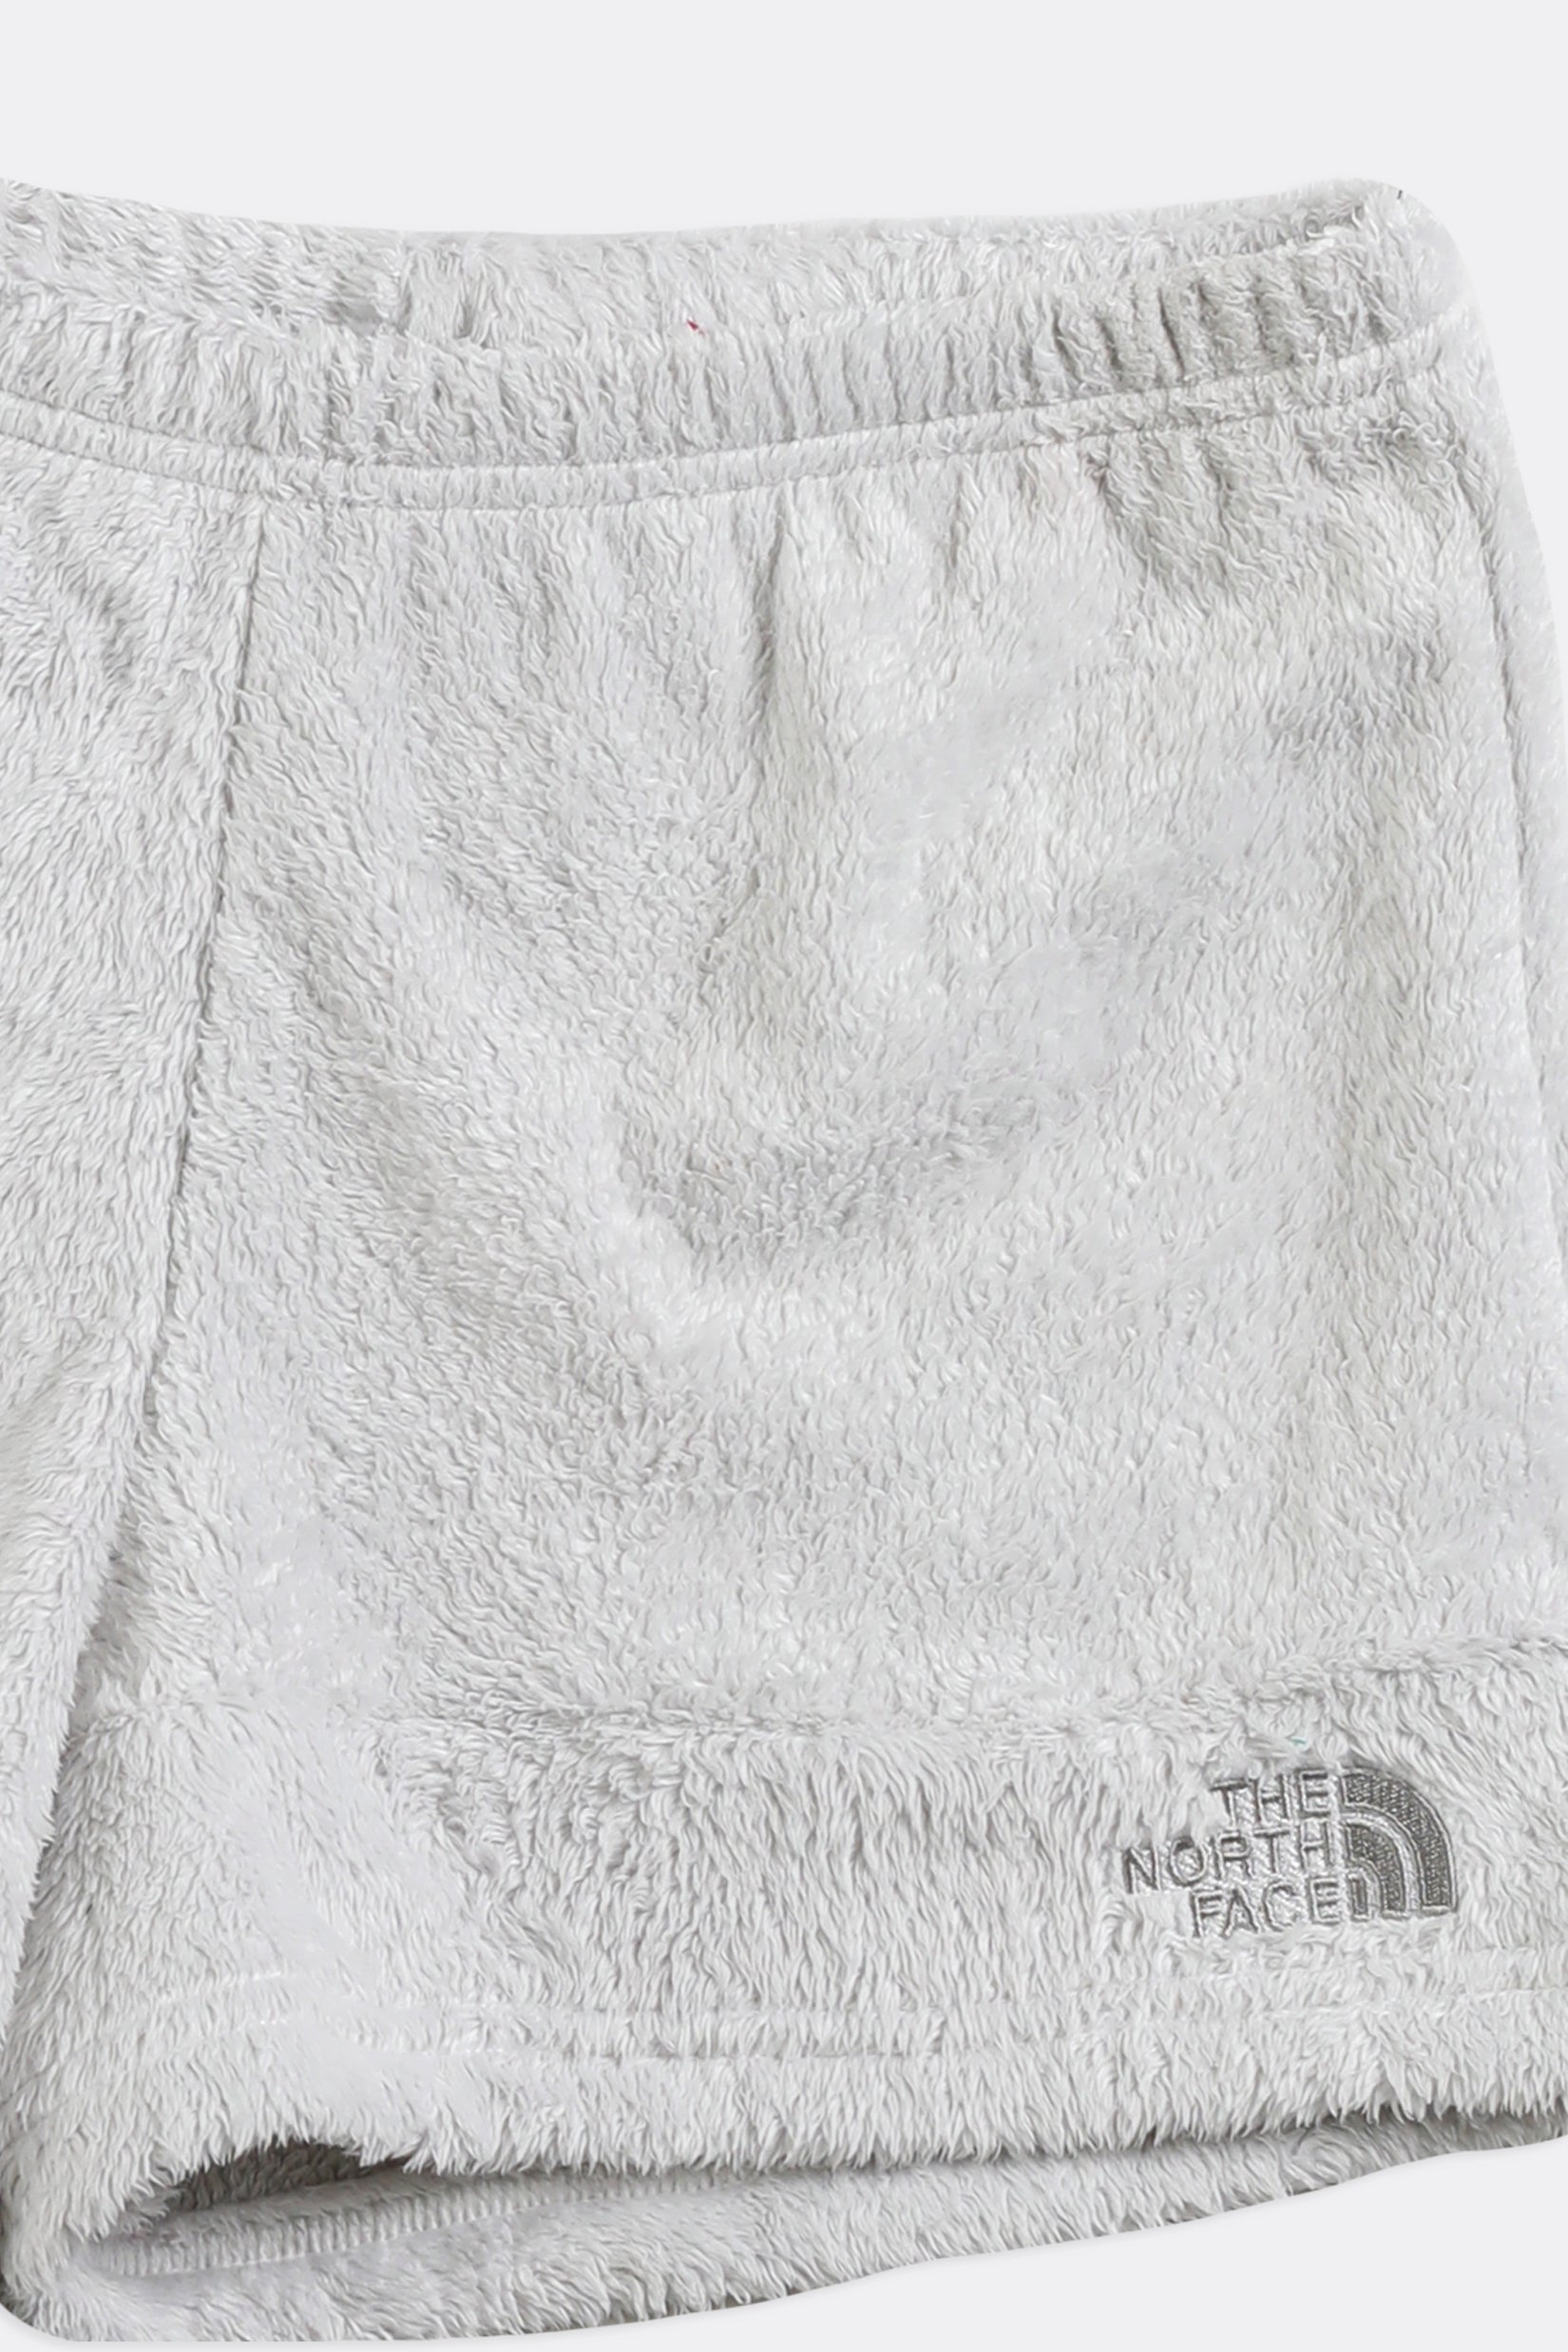 Rework North Face Fuzzy Shorts - M – Frankie Collective